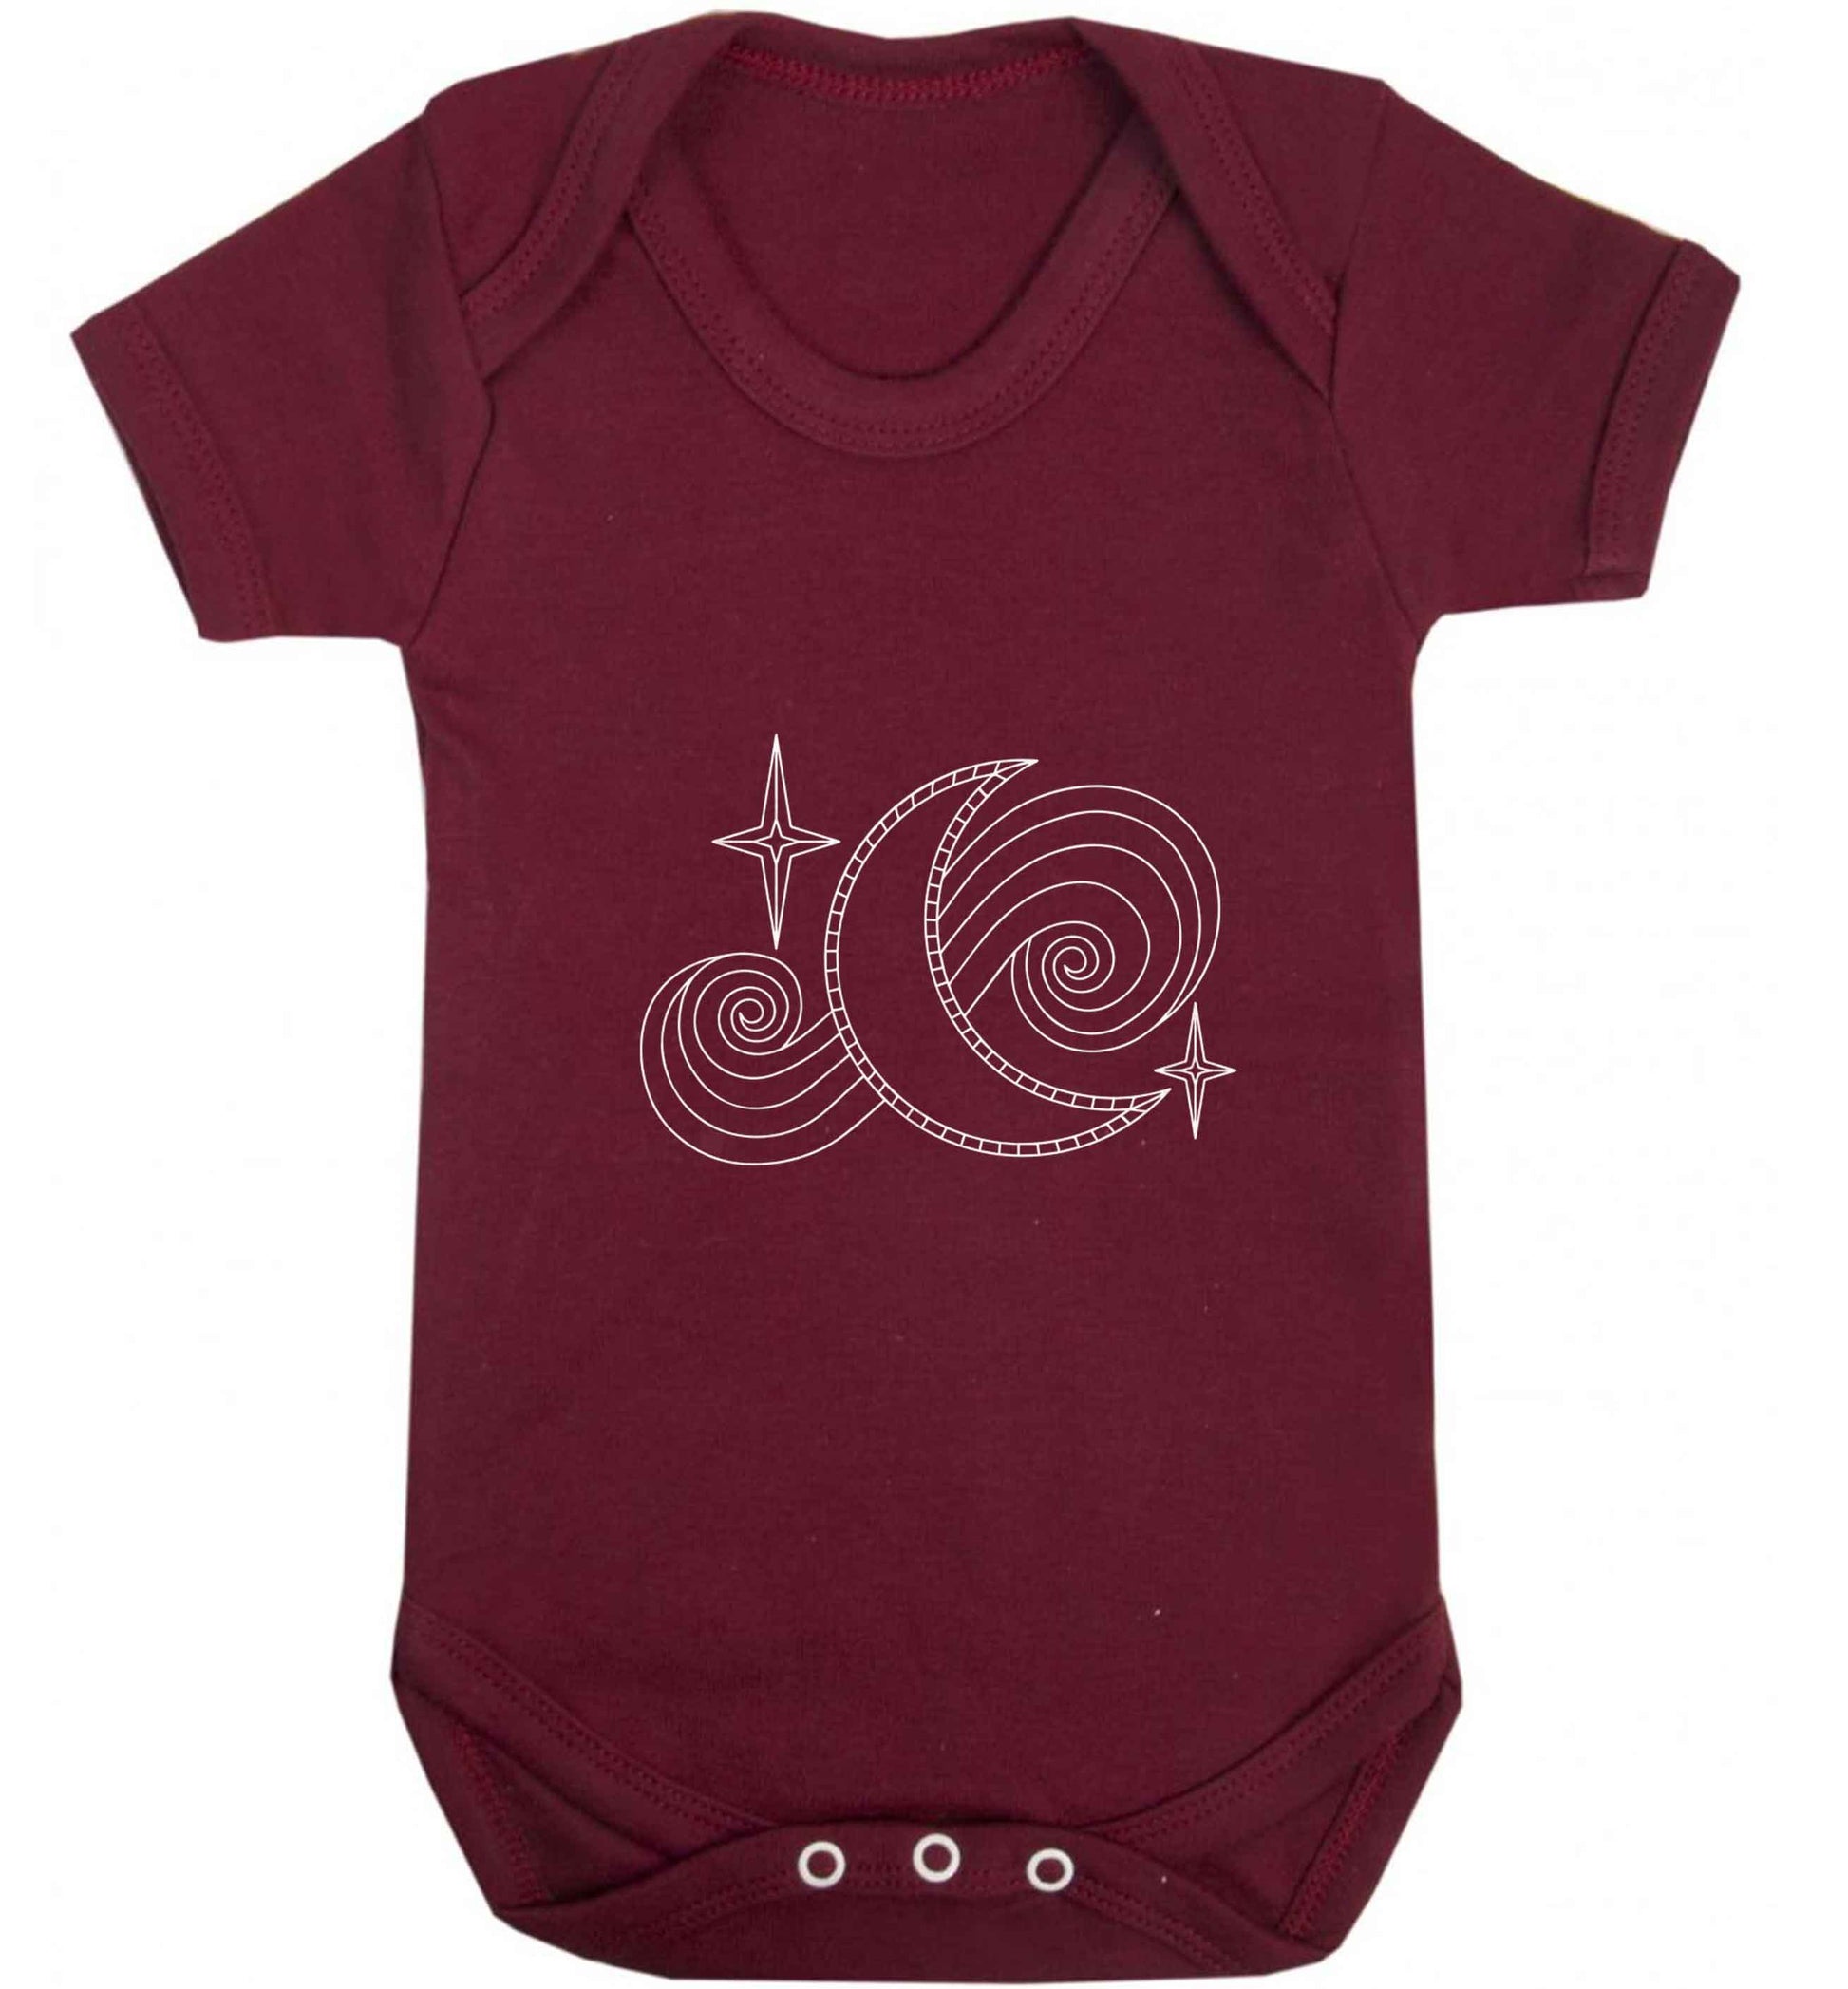 Moon and stars illustration baby vest maroon 18-24 months